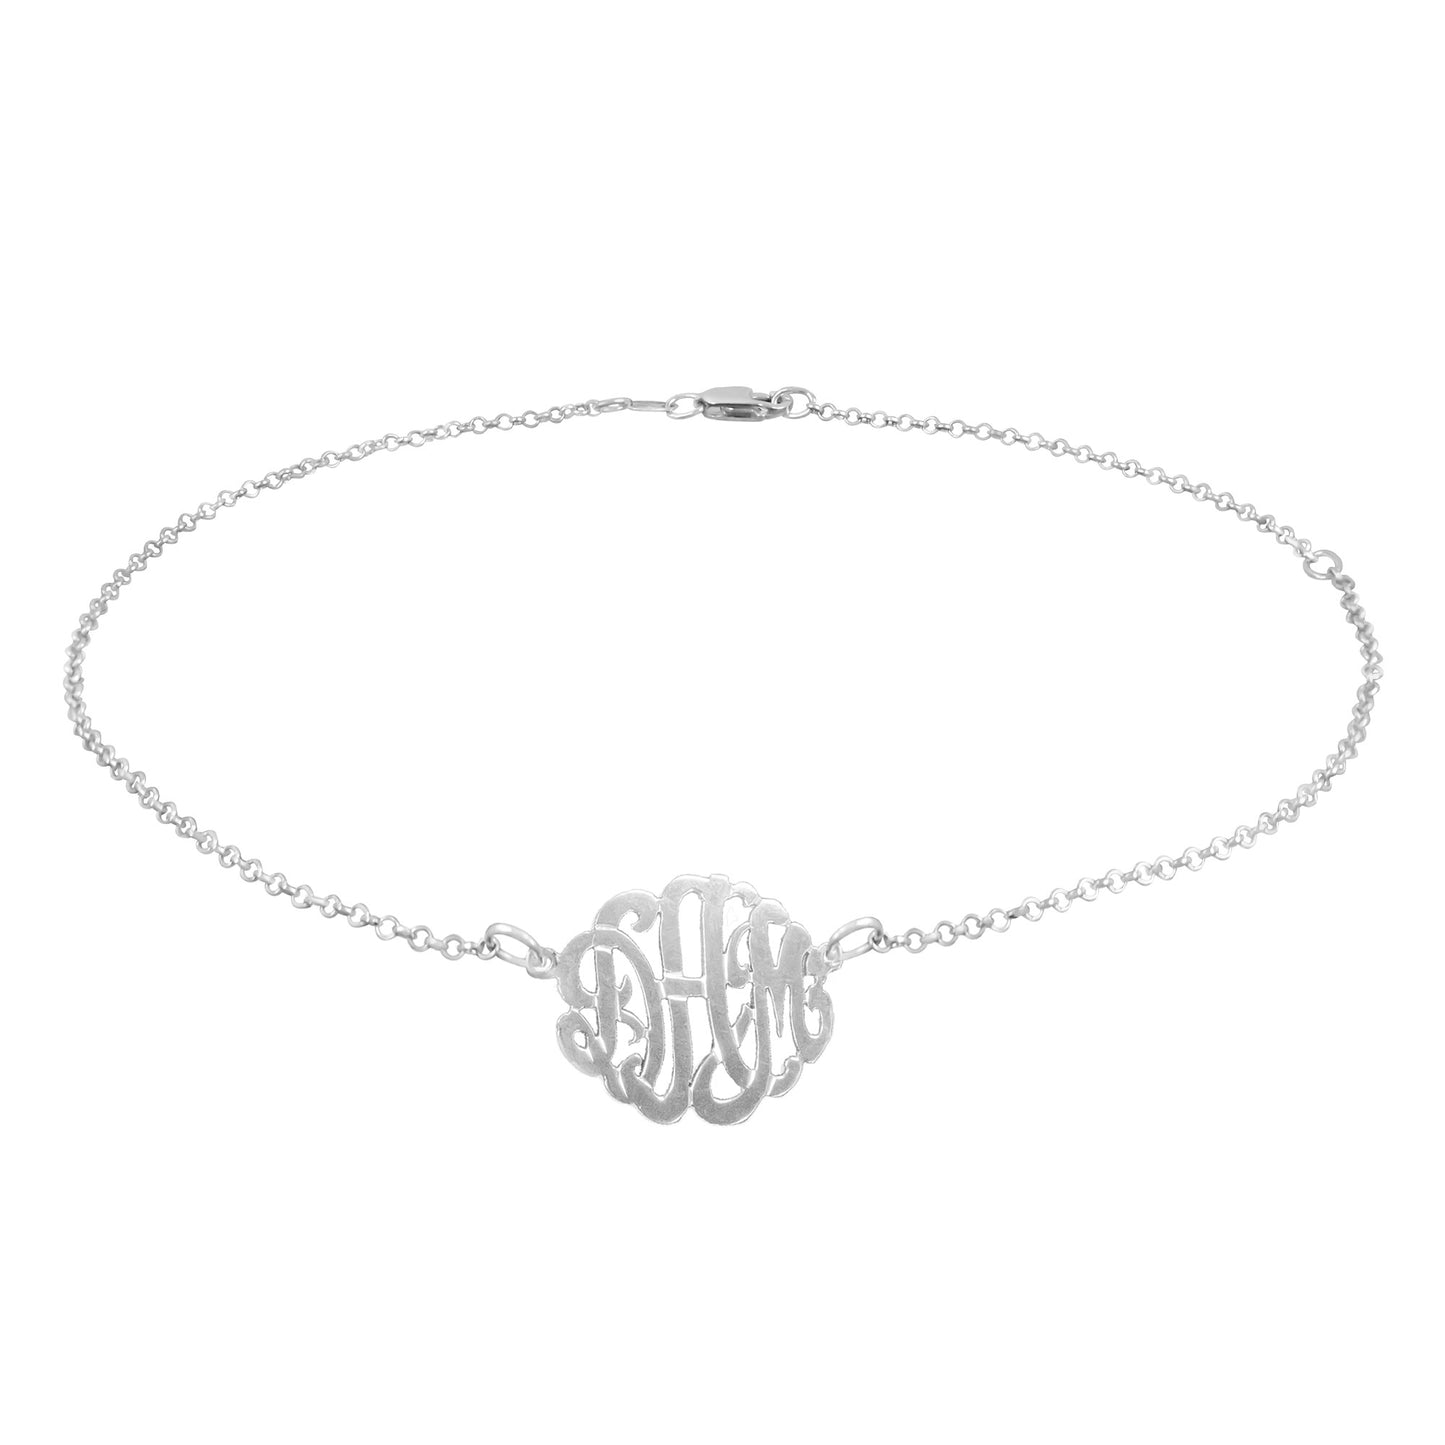 Personalized Monogram Anklet